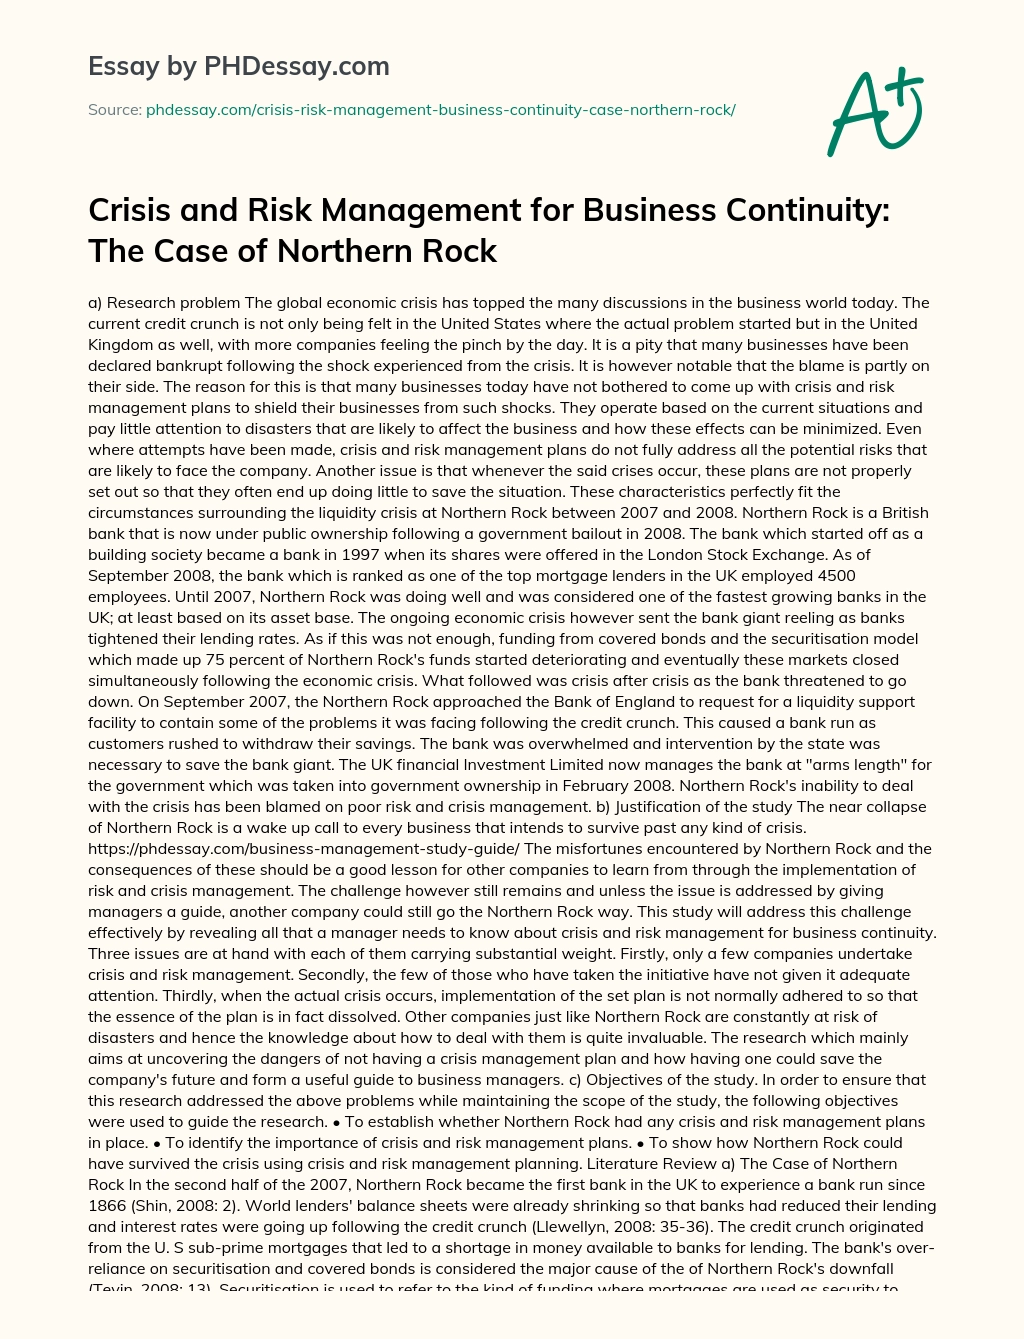 Crisis and Risk Management for Business Continuity: The Case of Northern Rock essay